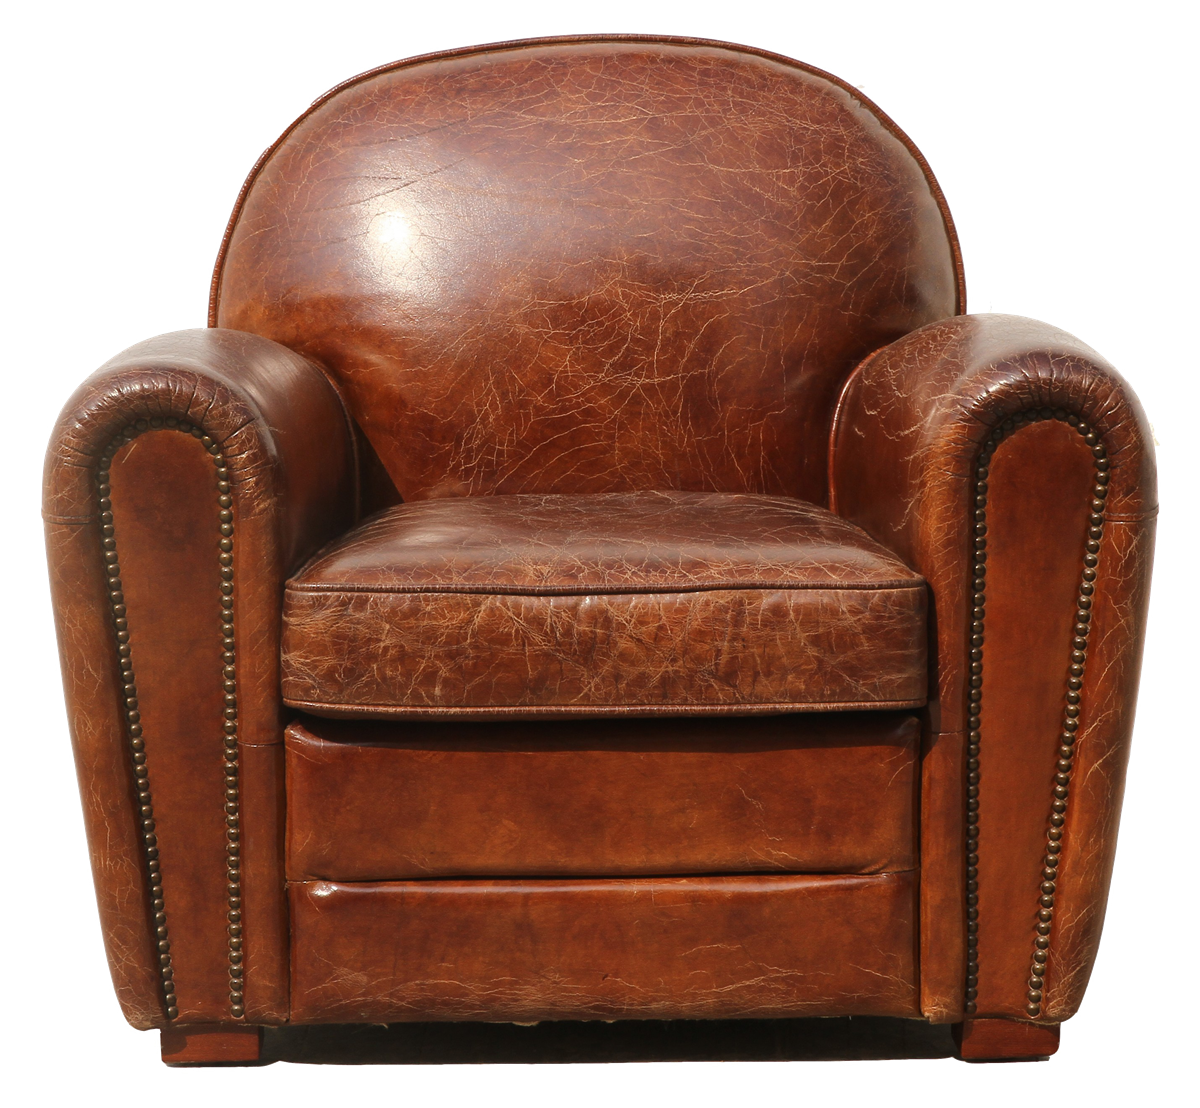 Club Chair Images Free Transparent Image HQ PNG Image